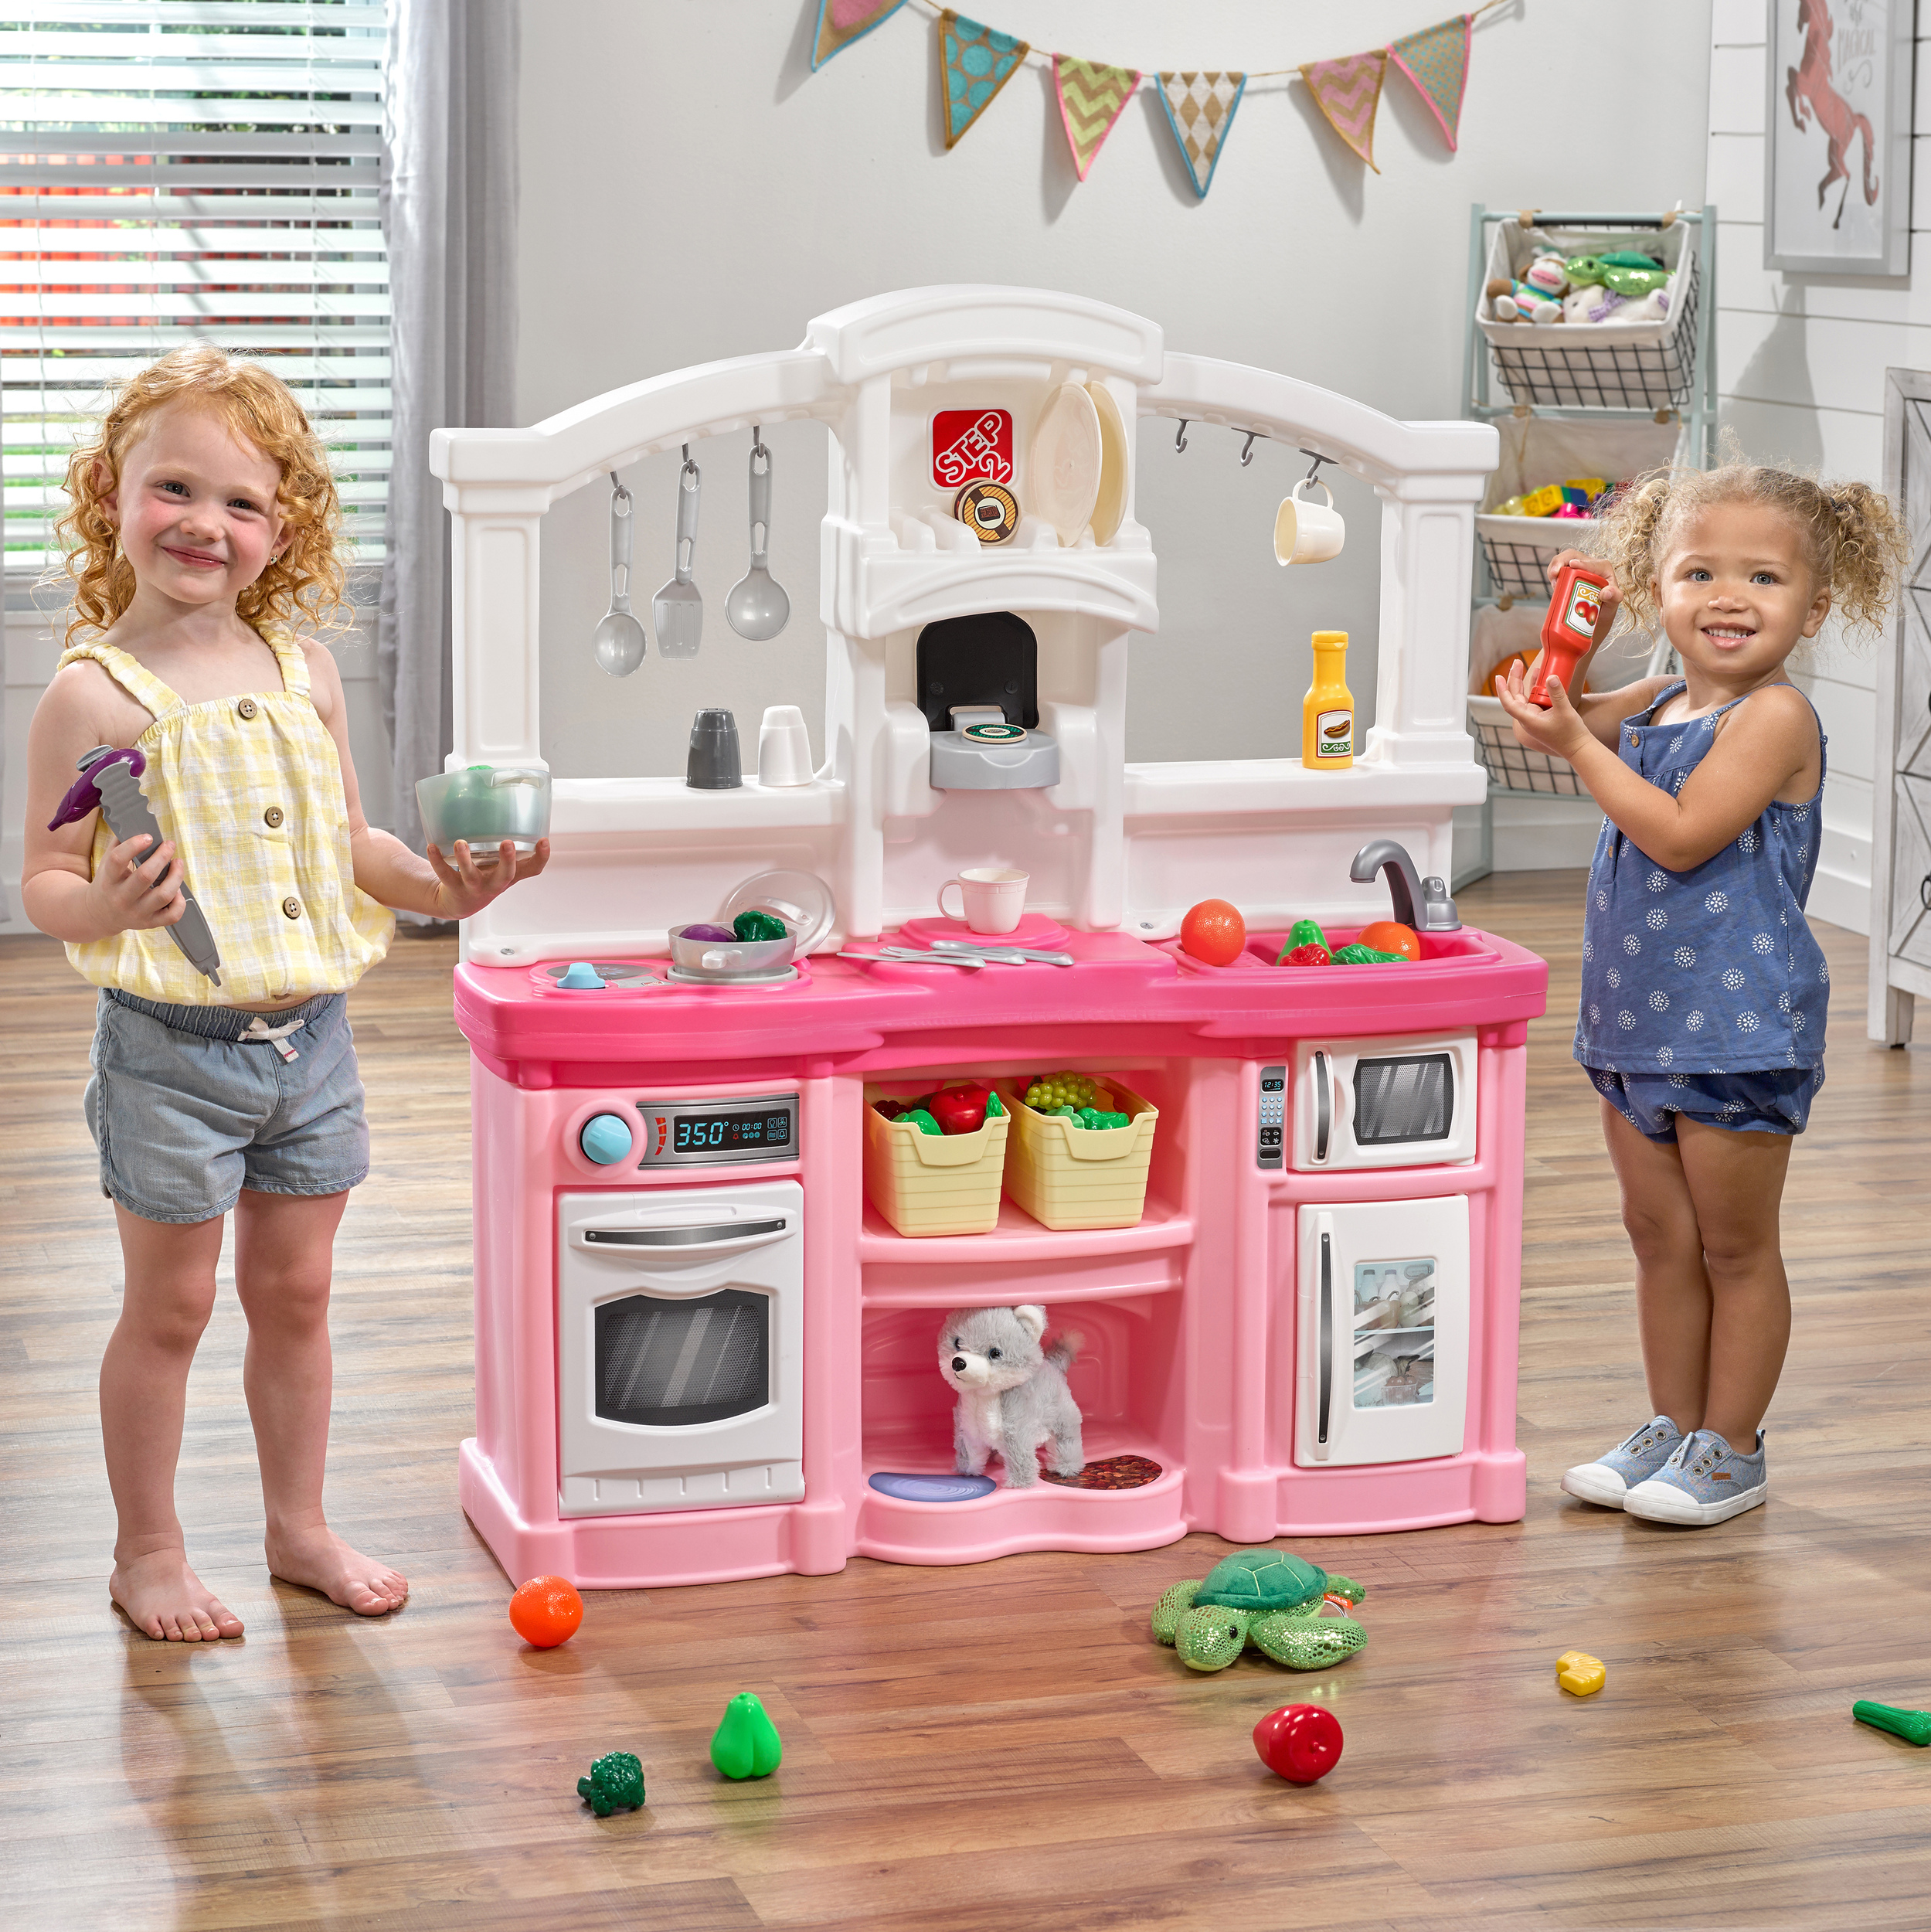 Step2 Fun with Friends Pink Toddler Kitchen Play Set - image 3 of 22